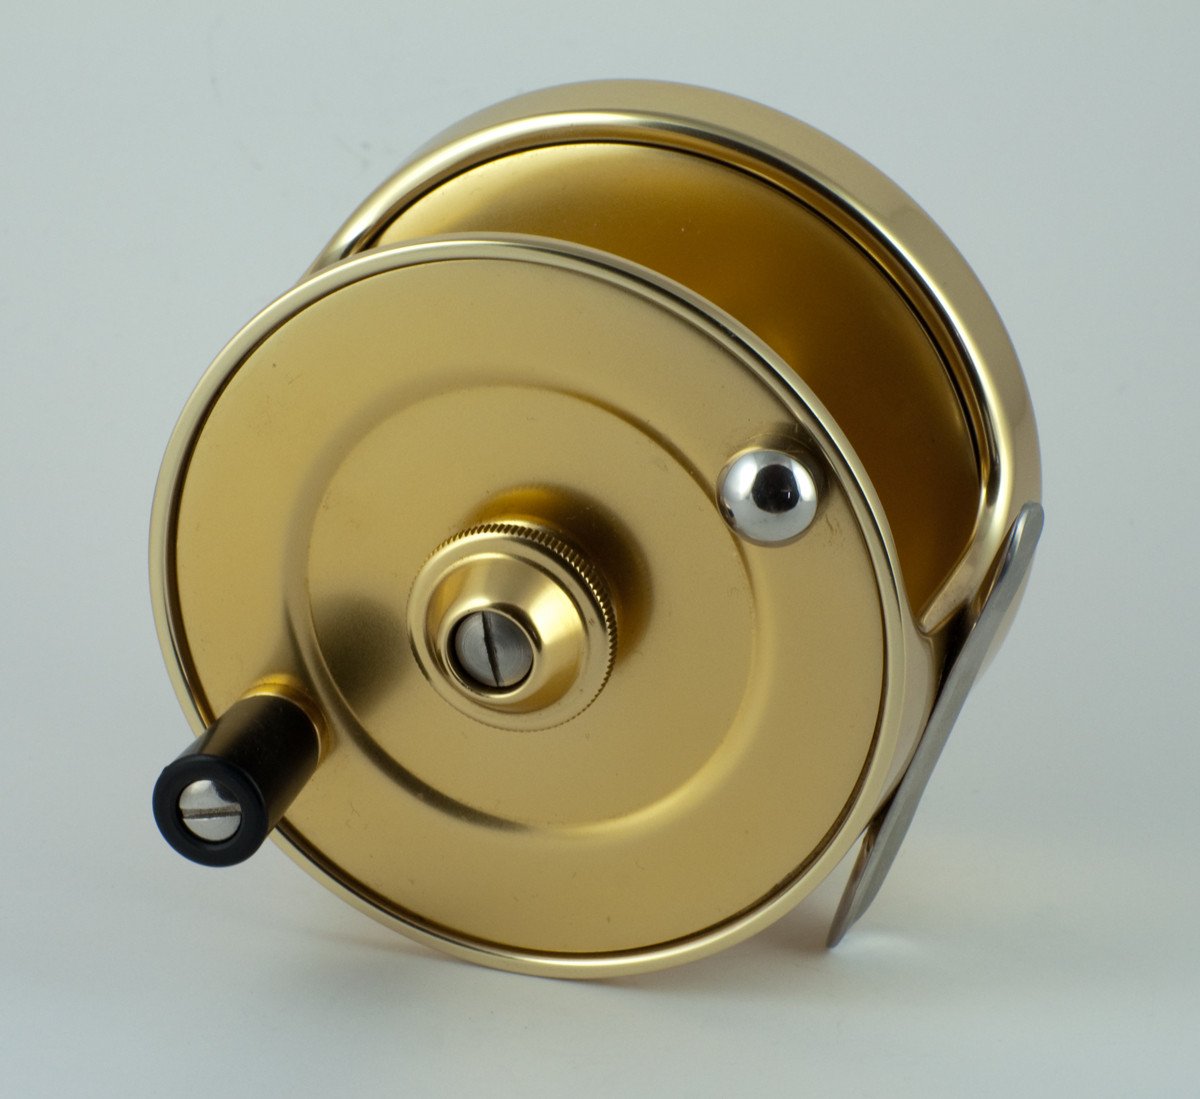 Fin-Nor No. 4 Direct Drive Fly Reel